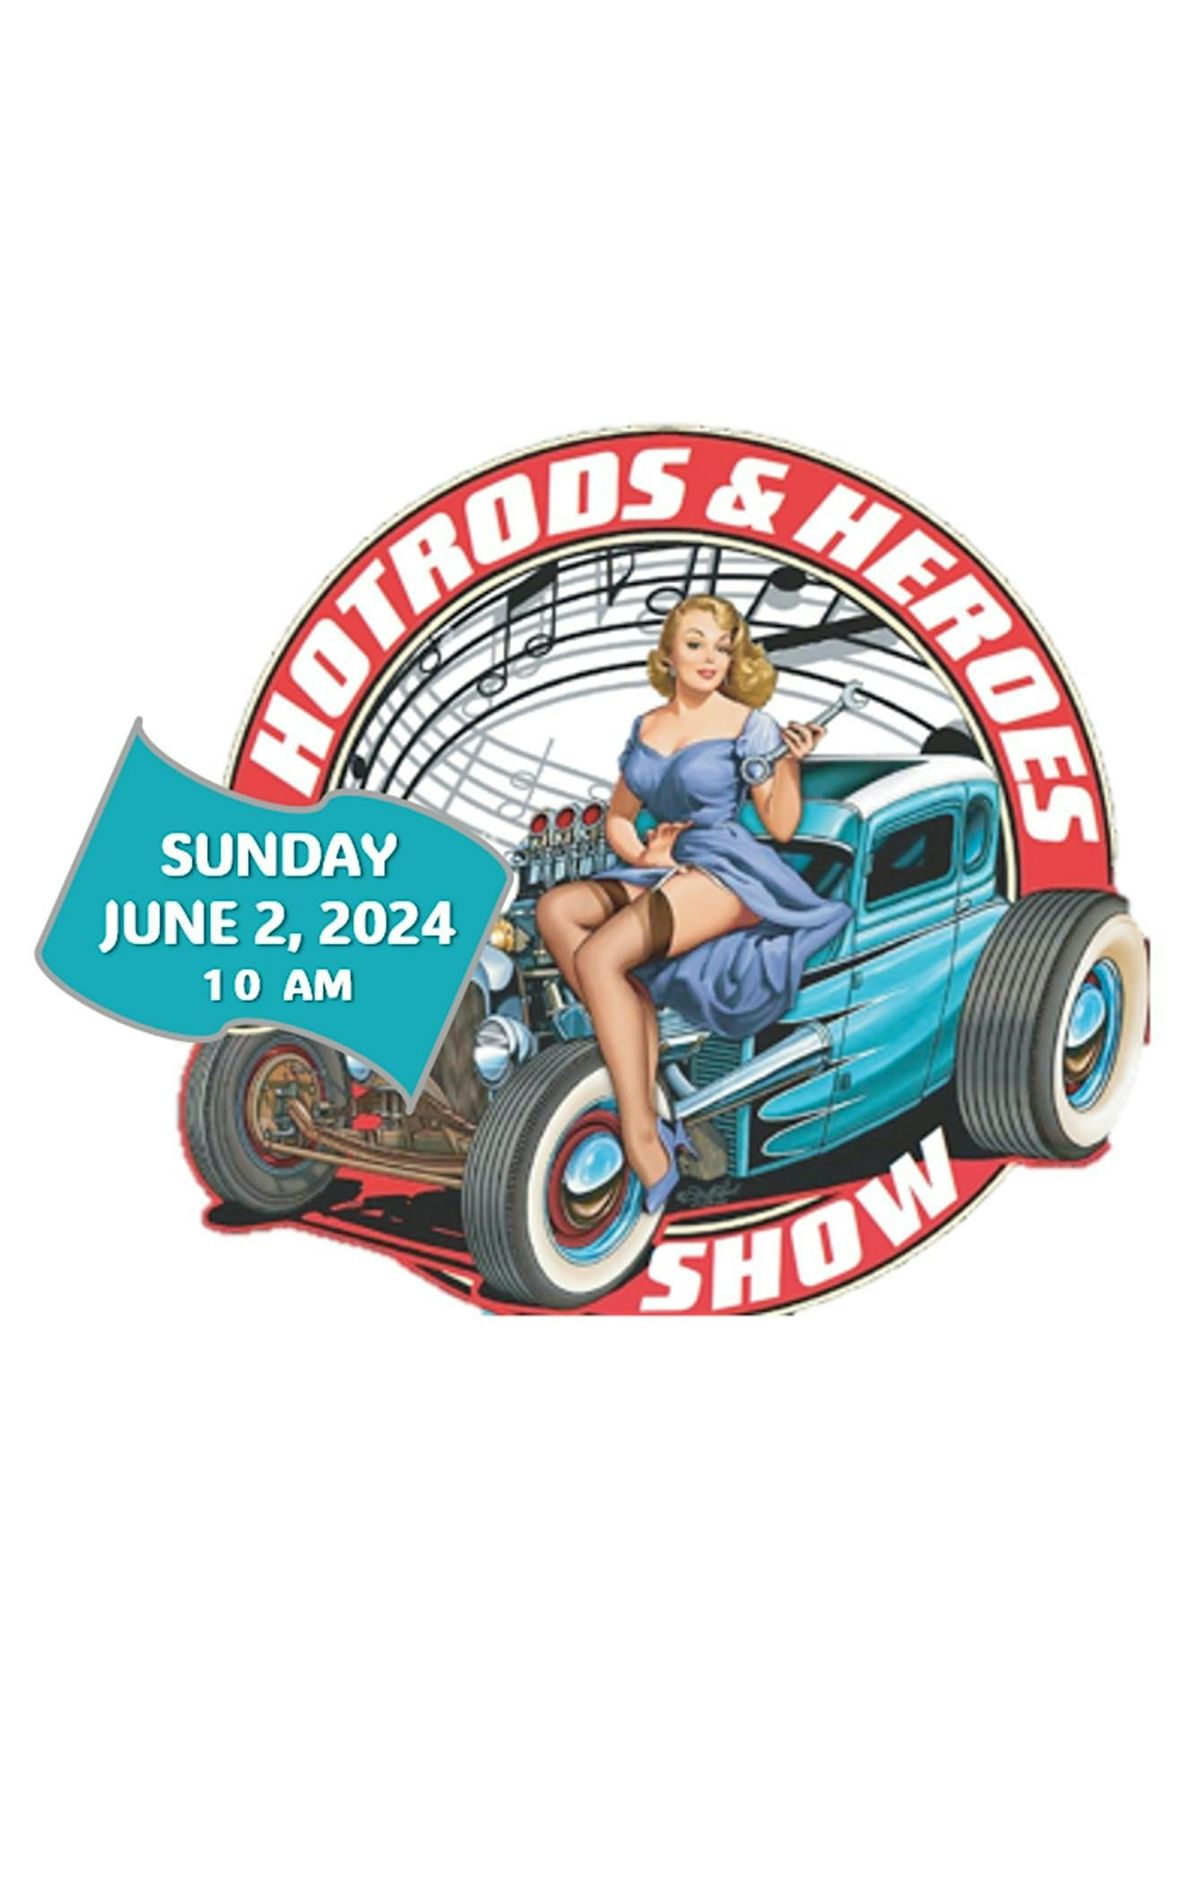 2nd Annual Hot Rods and Heroes Show - VENDOR BOOTH